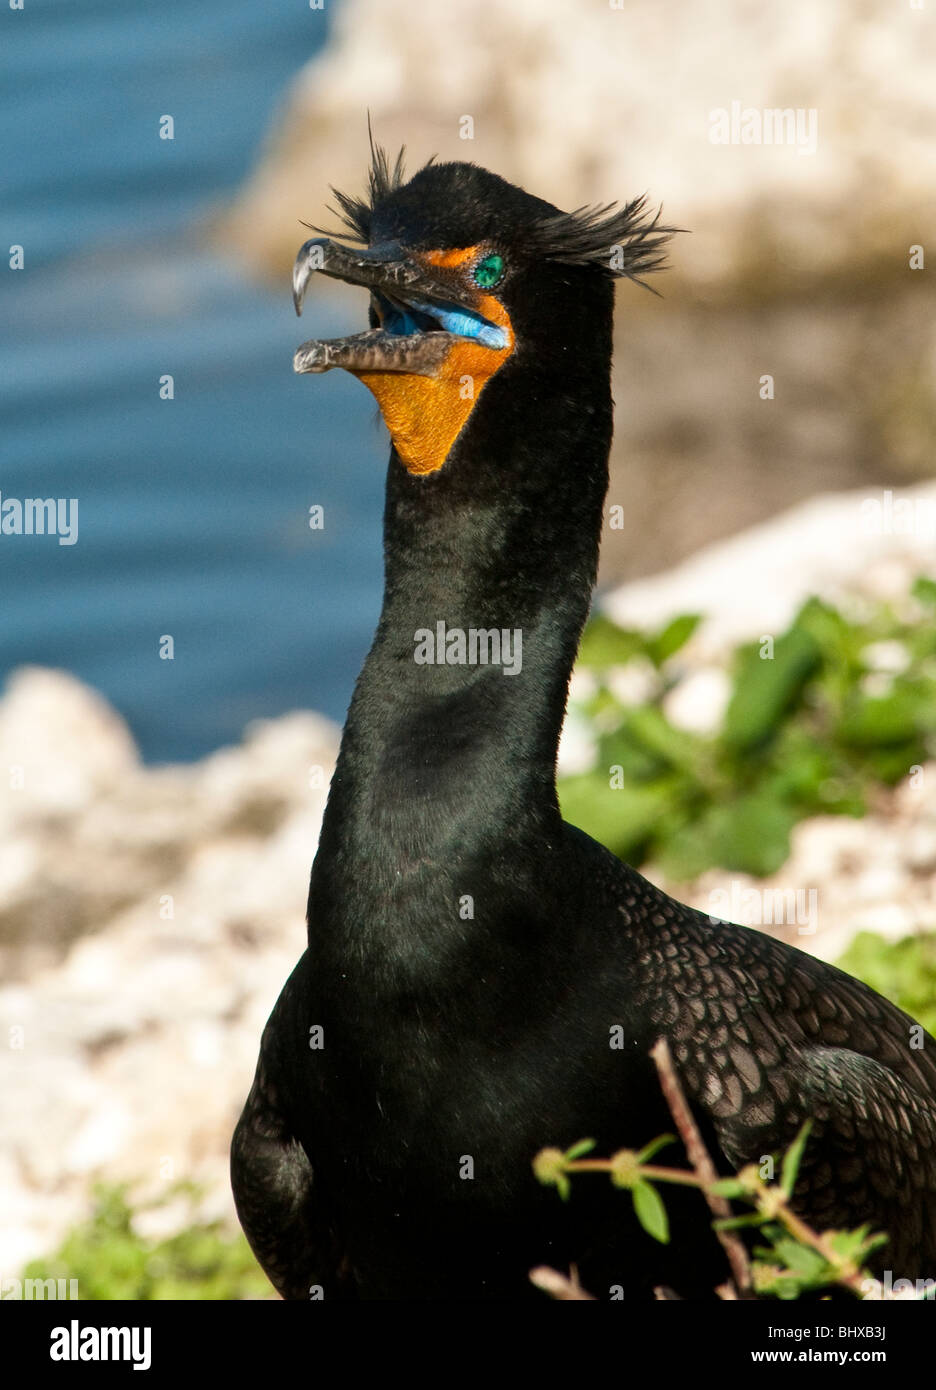 Double crested cormorant portrait with prominent visible crests and open mouth, large North Amiterican aquatic bird Stock Photo